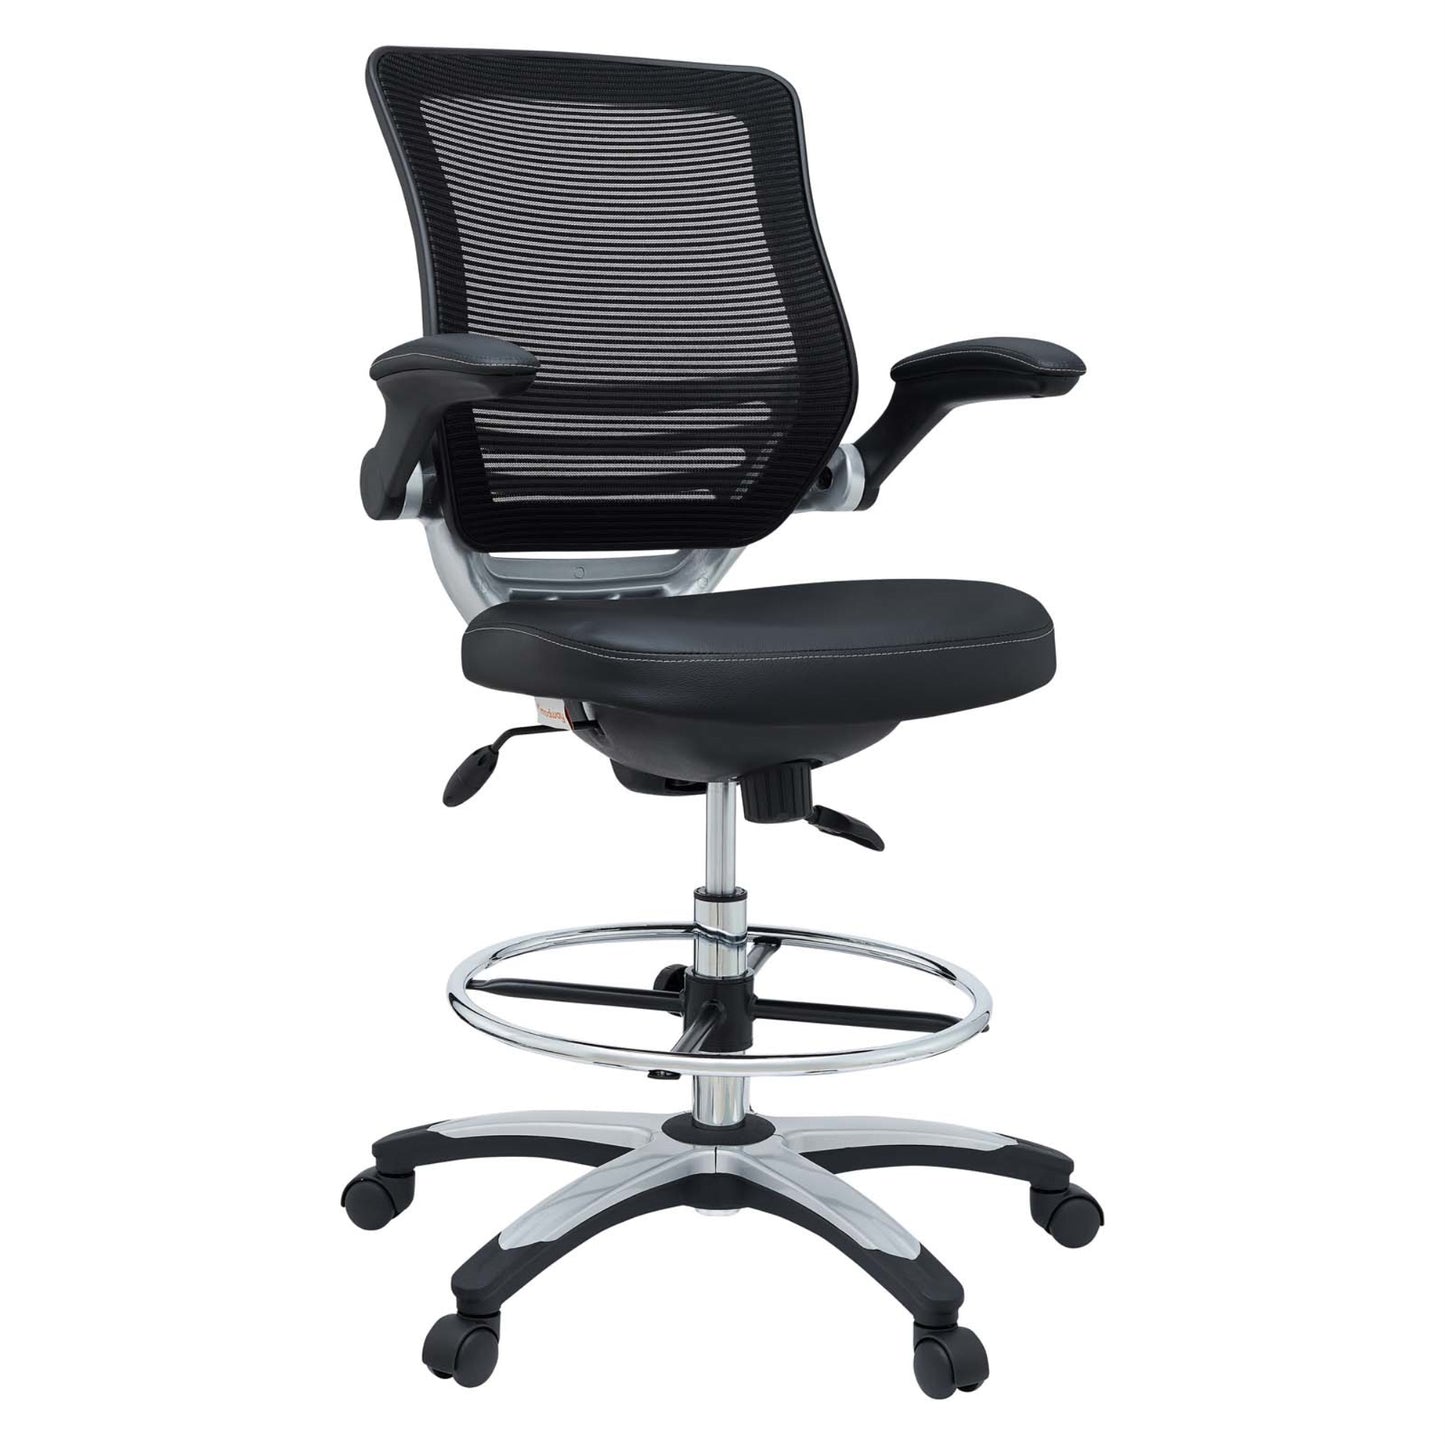 CasaFoyer Edge Drafting Stool - Revolutionary Ergonomic Chair with Mesh Back, Padded Seat, Flip-Up Arms, and Footring. Perfect for School, Work, or Home.